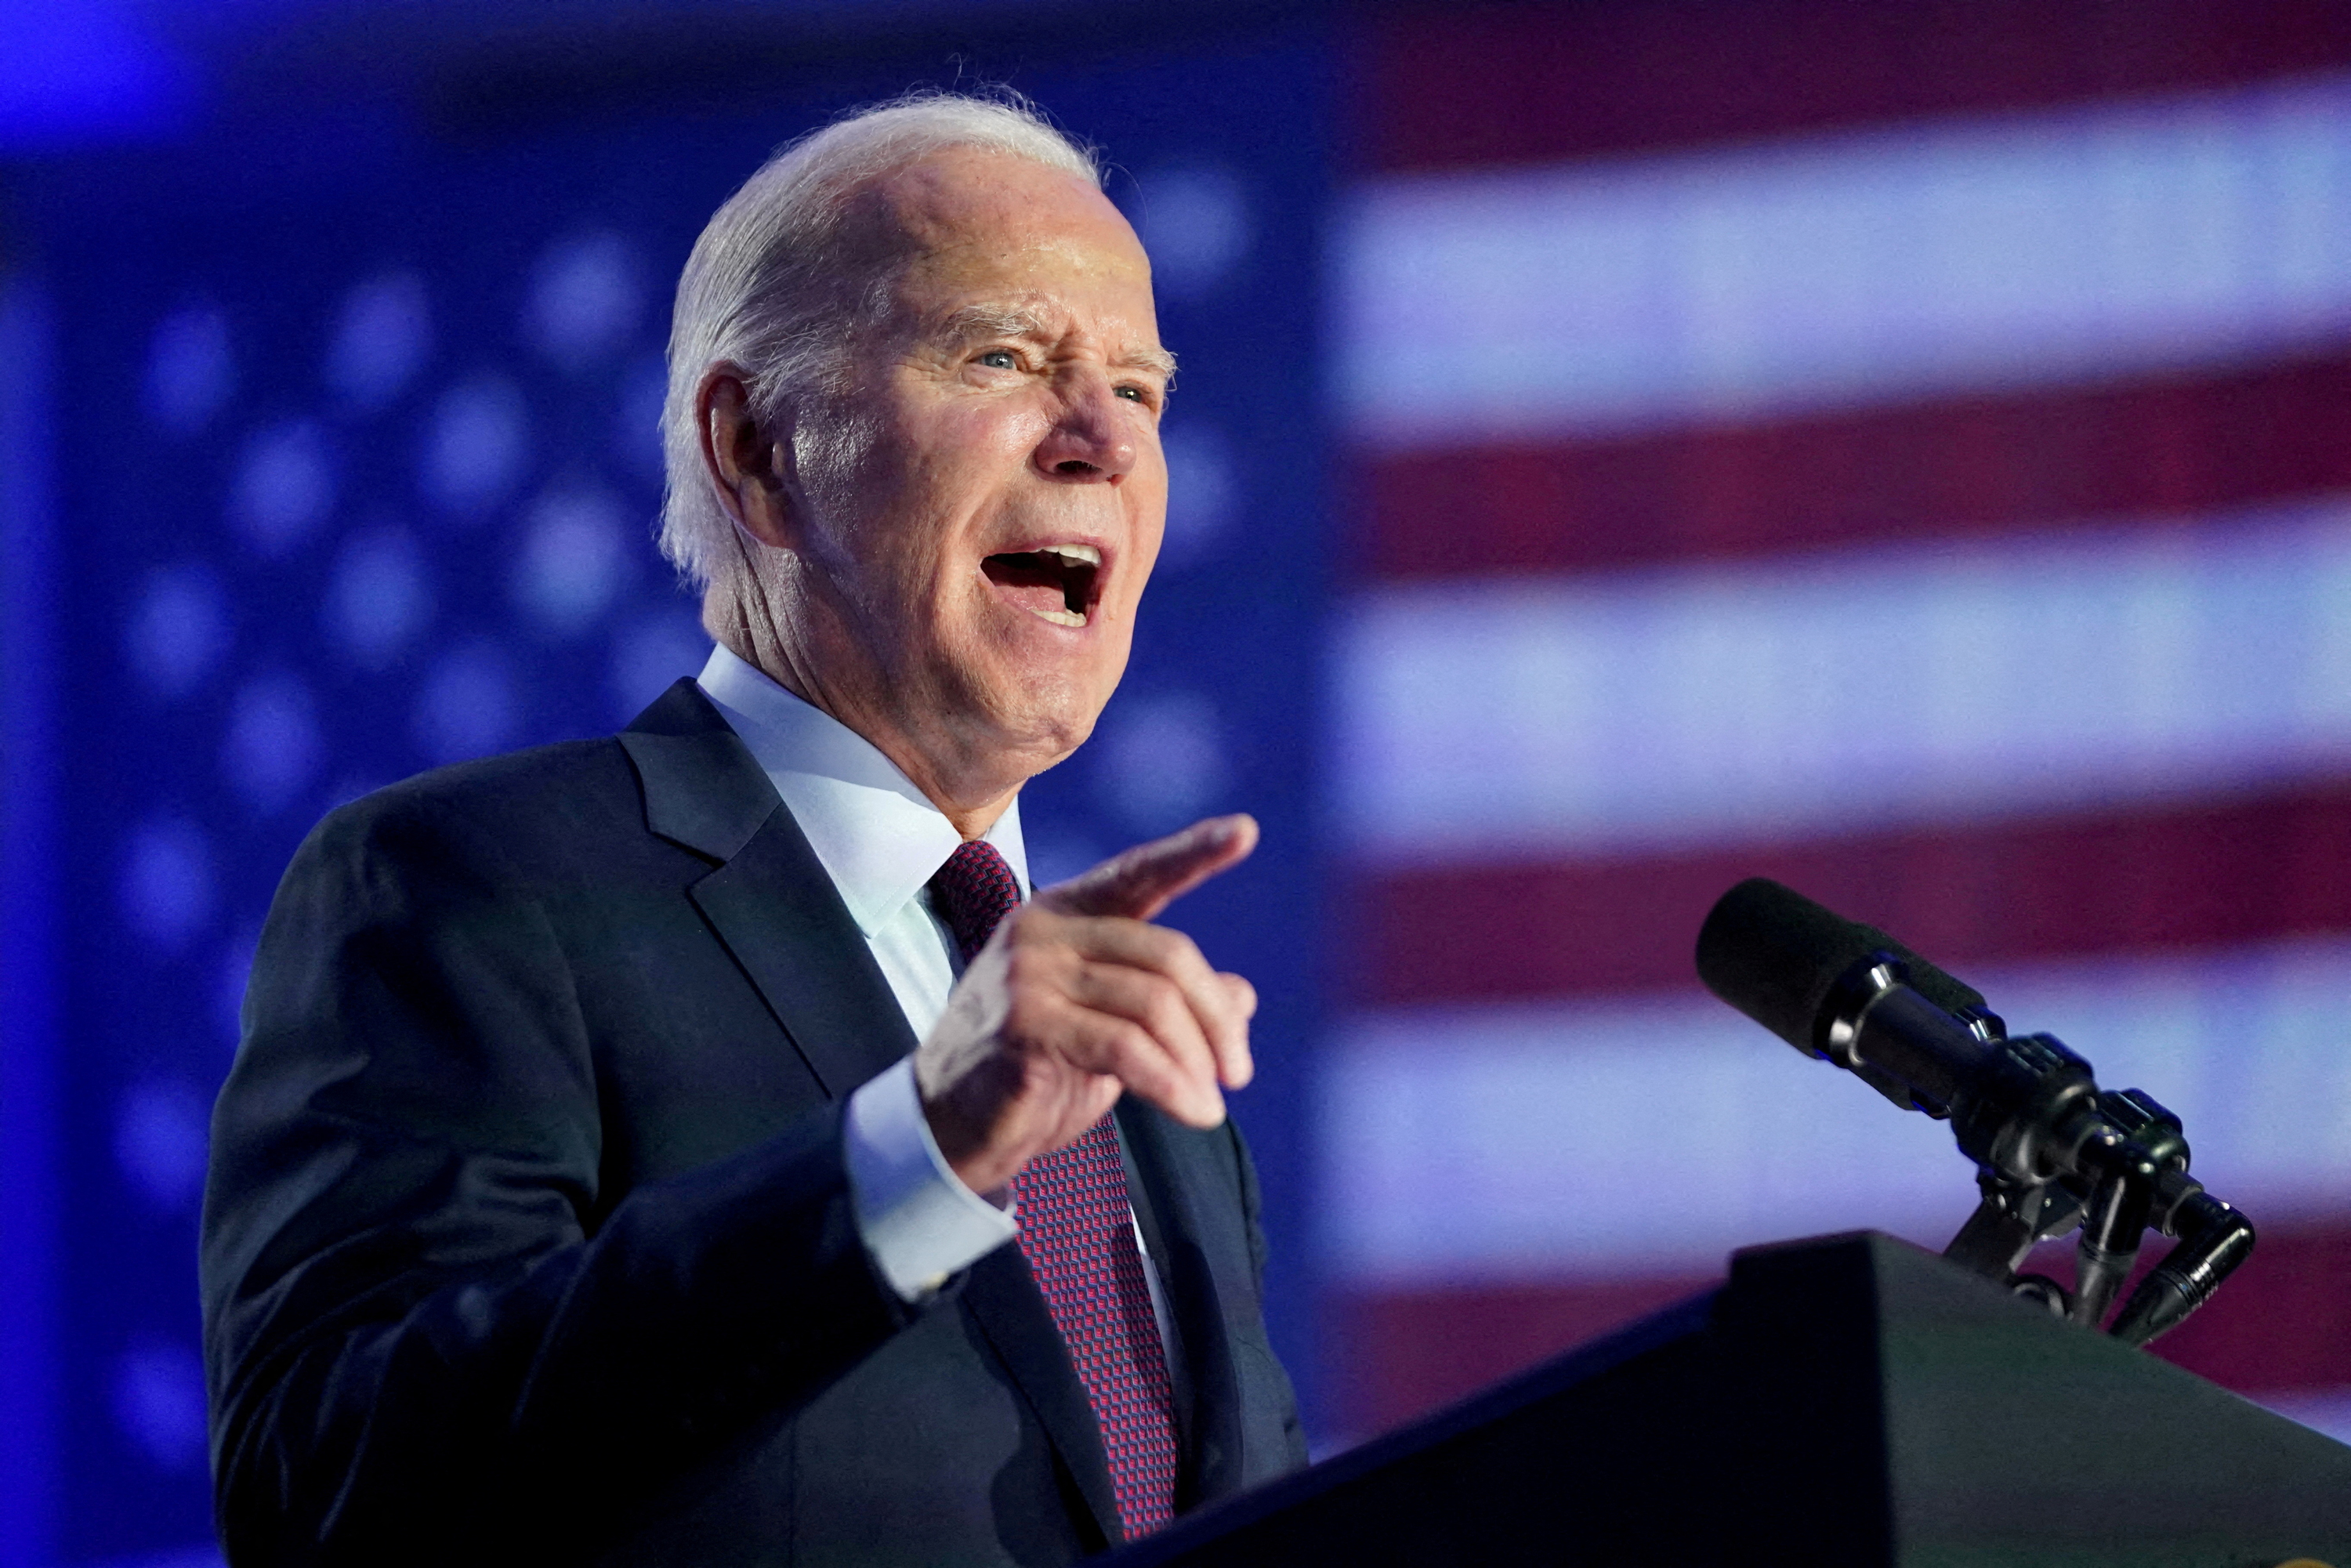 Joe Biden holds a campaign rally ahead of the state's Democratic presidential primary, in Las Vegas, Nevada, on February 4.